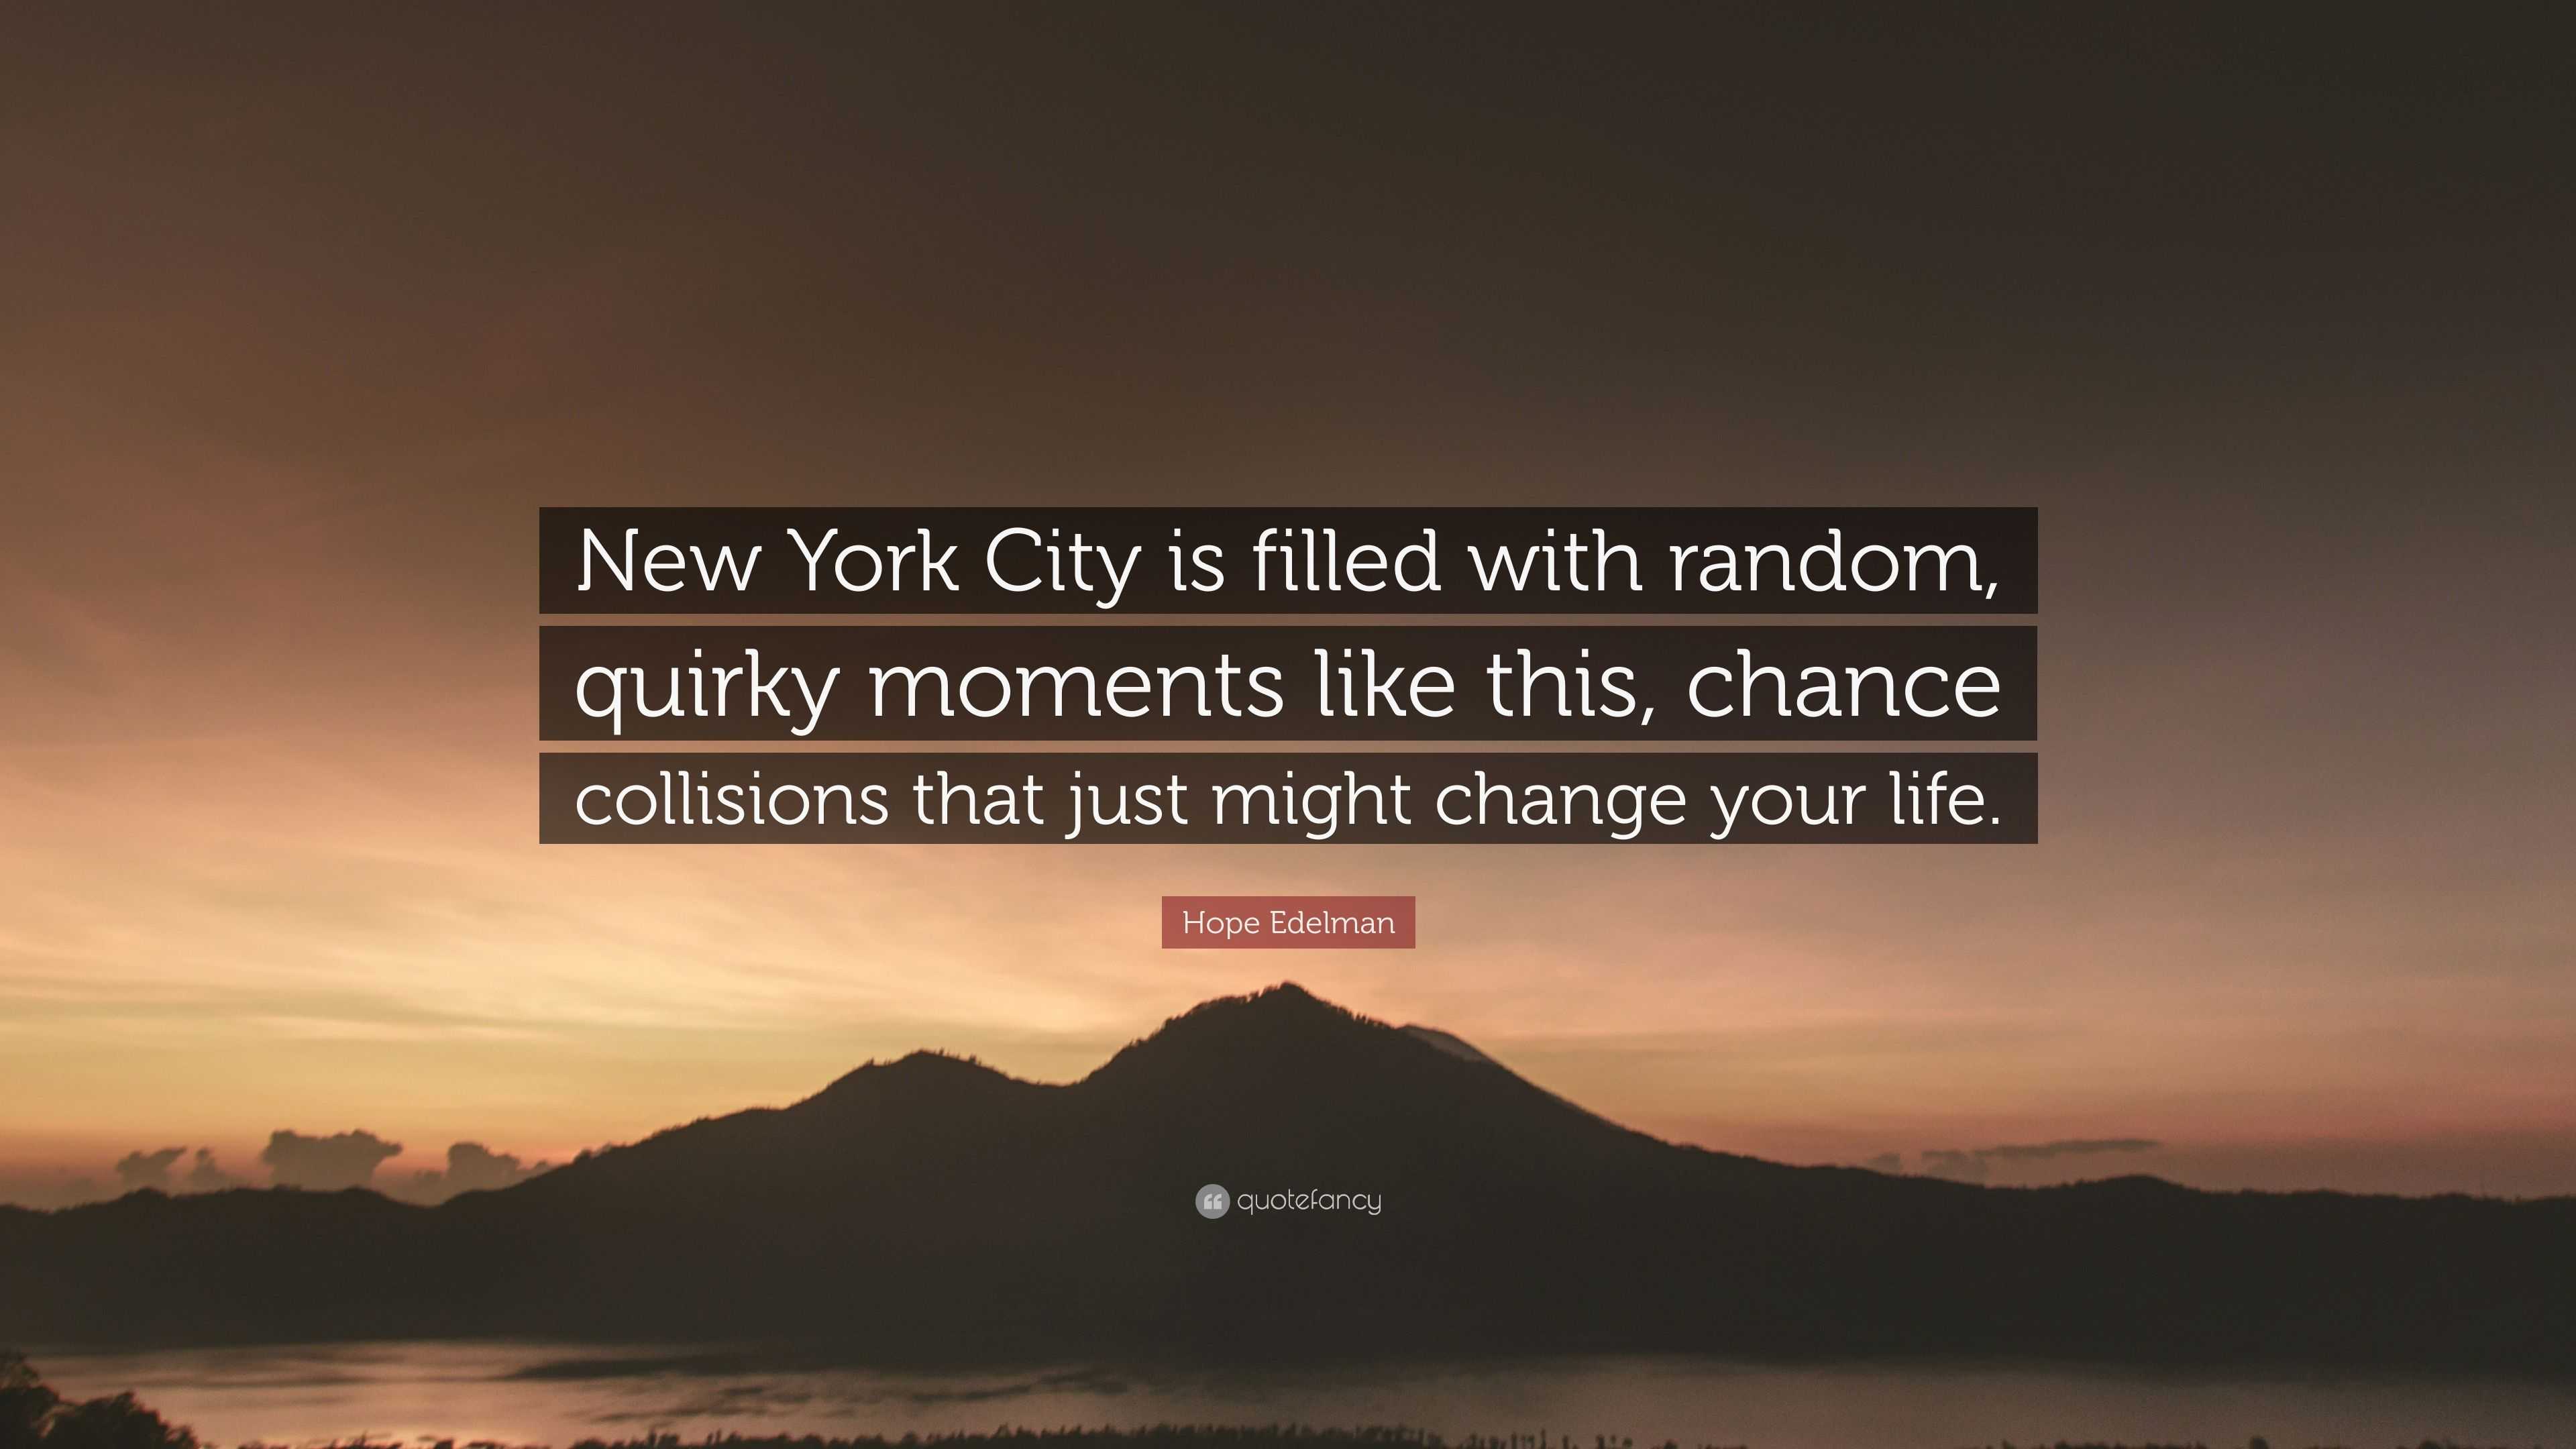 Hope Edelman Quote “New York City is filled with random quirky moments like